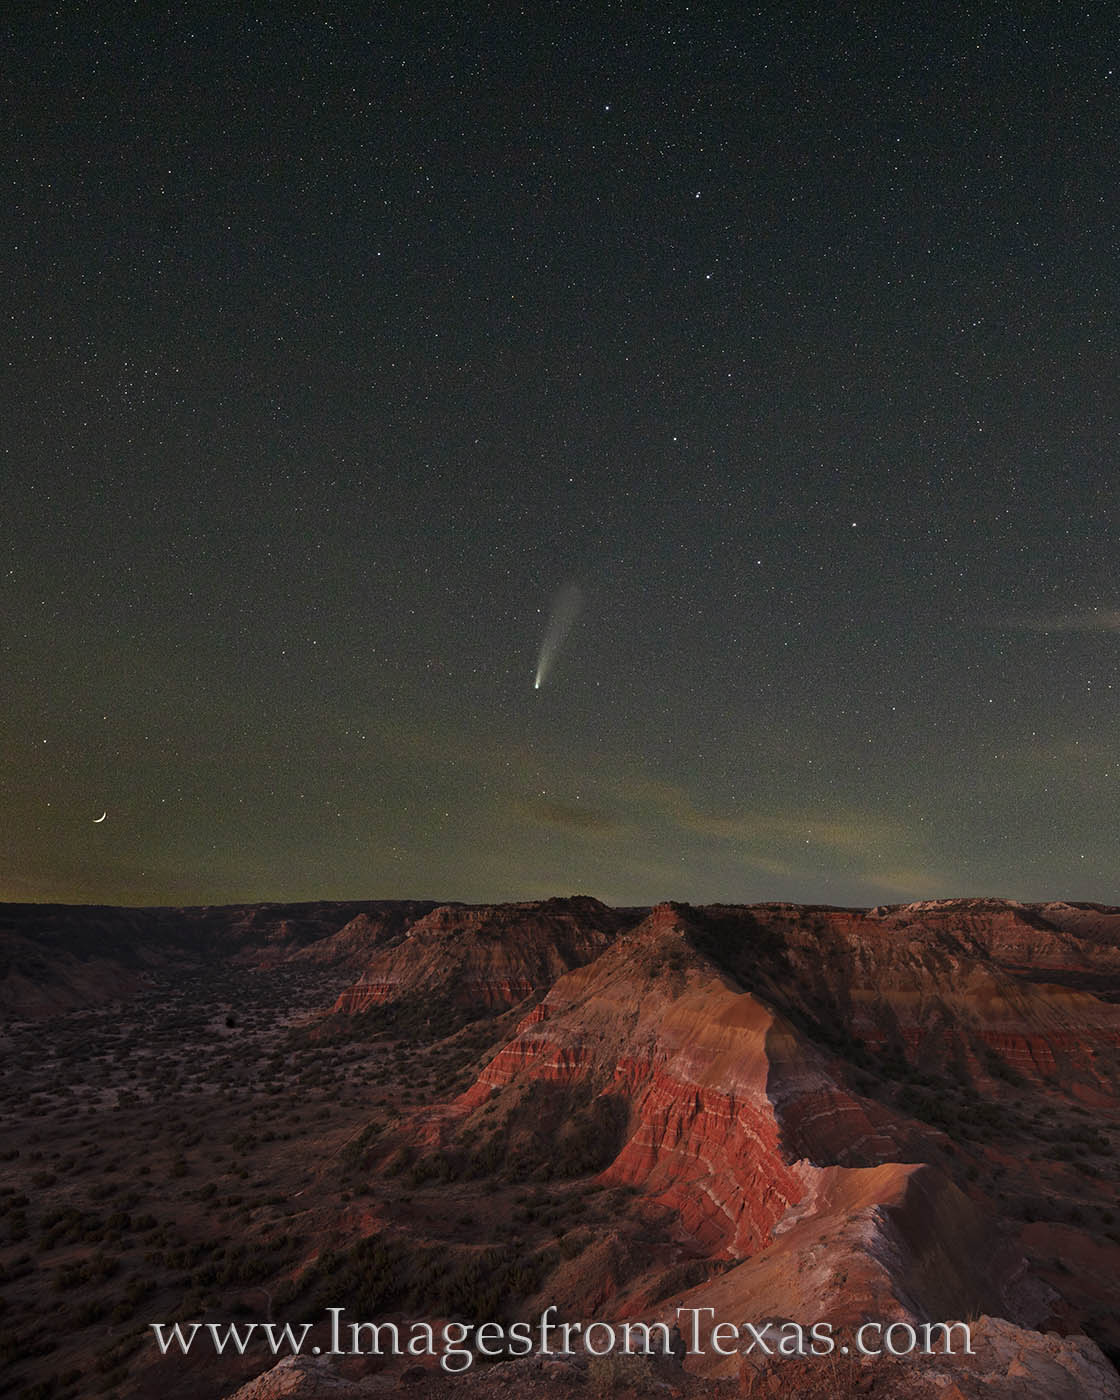 From the night of July 23, 2020, this is a composite image of the Comet NEOWISE over the beautiful red rocks of Palo Duro Canyon...